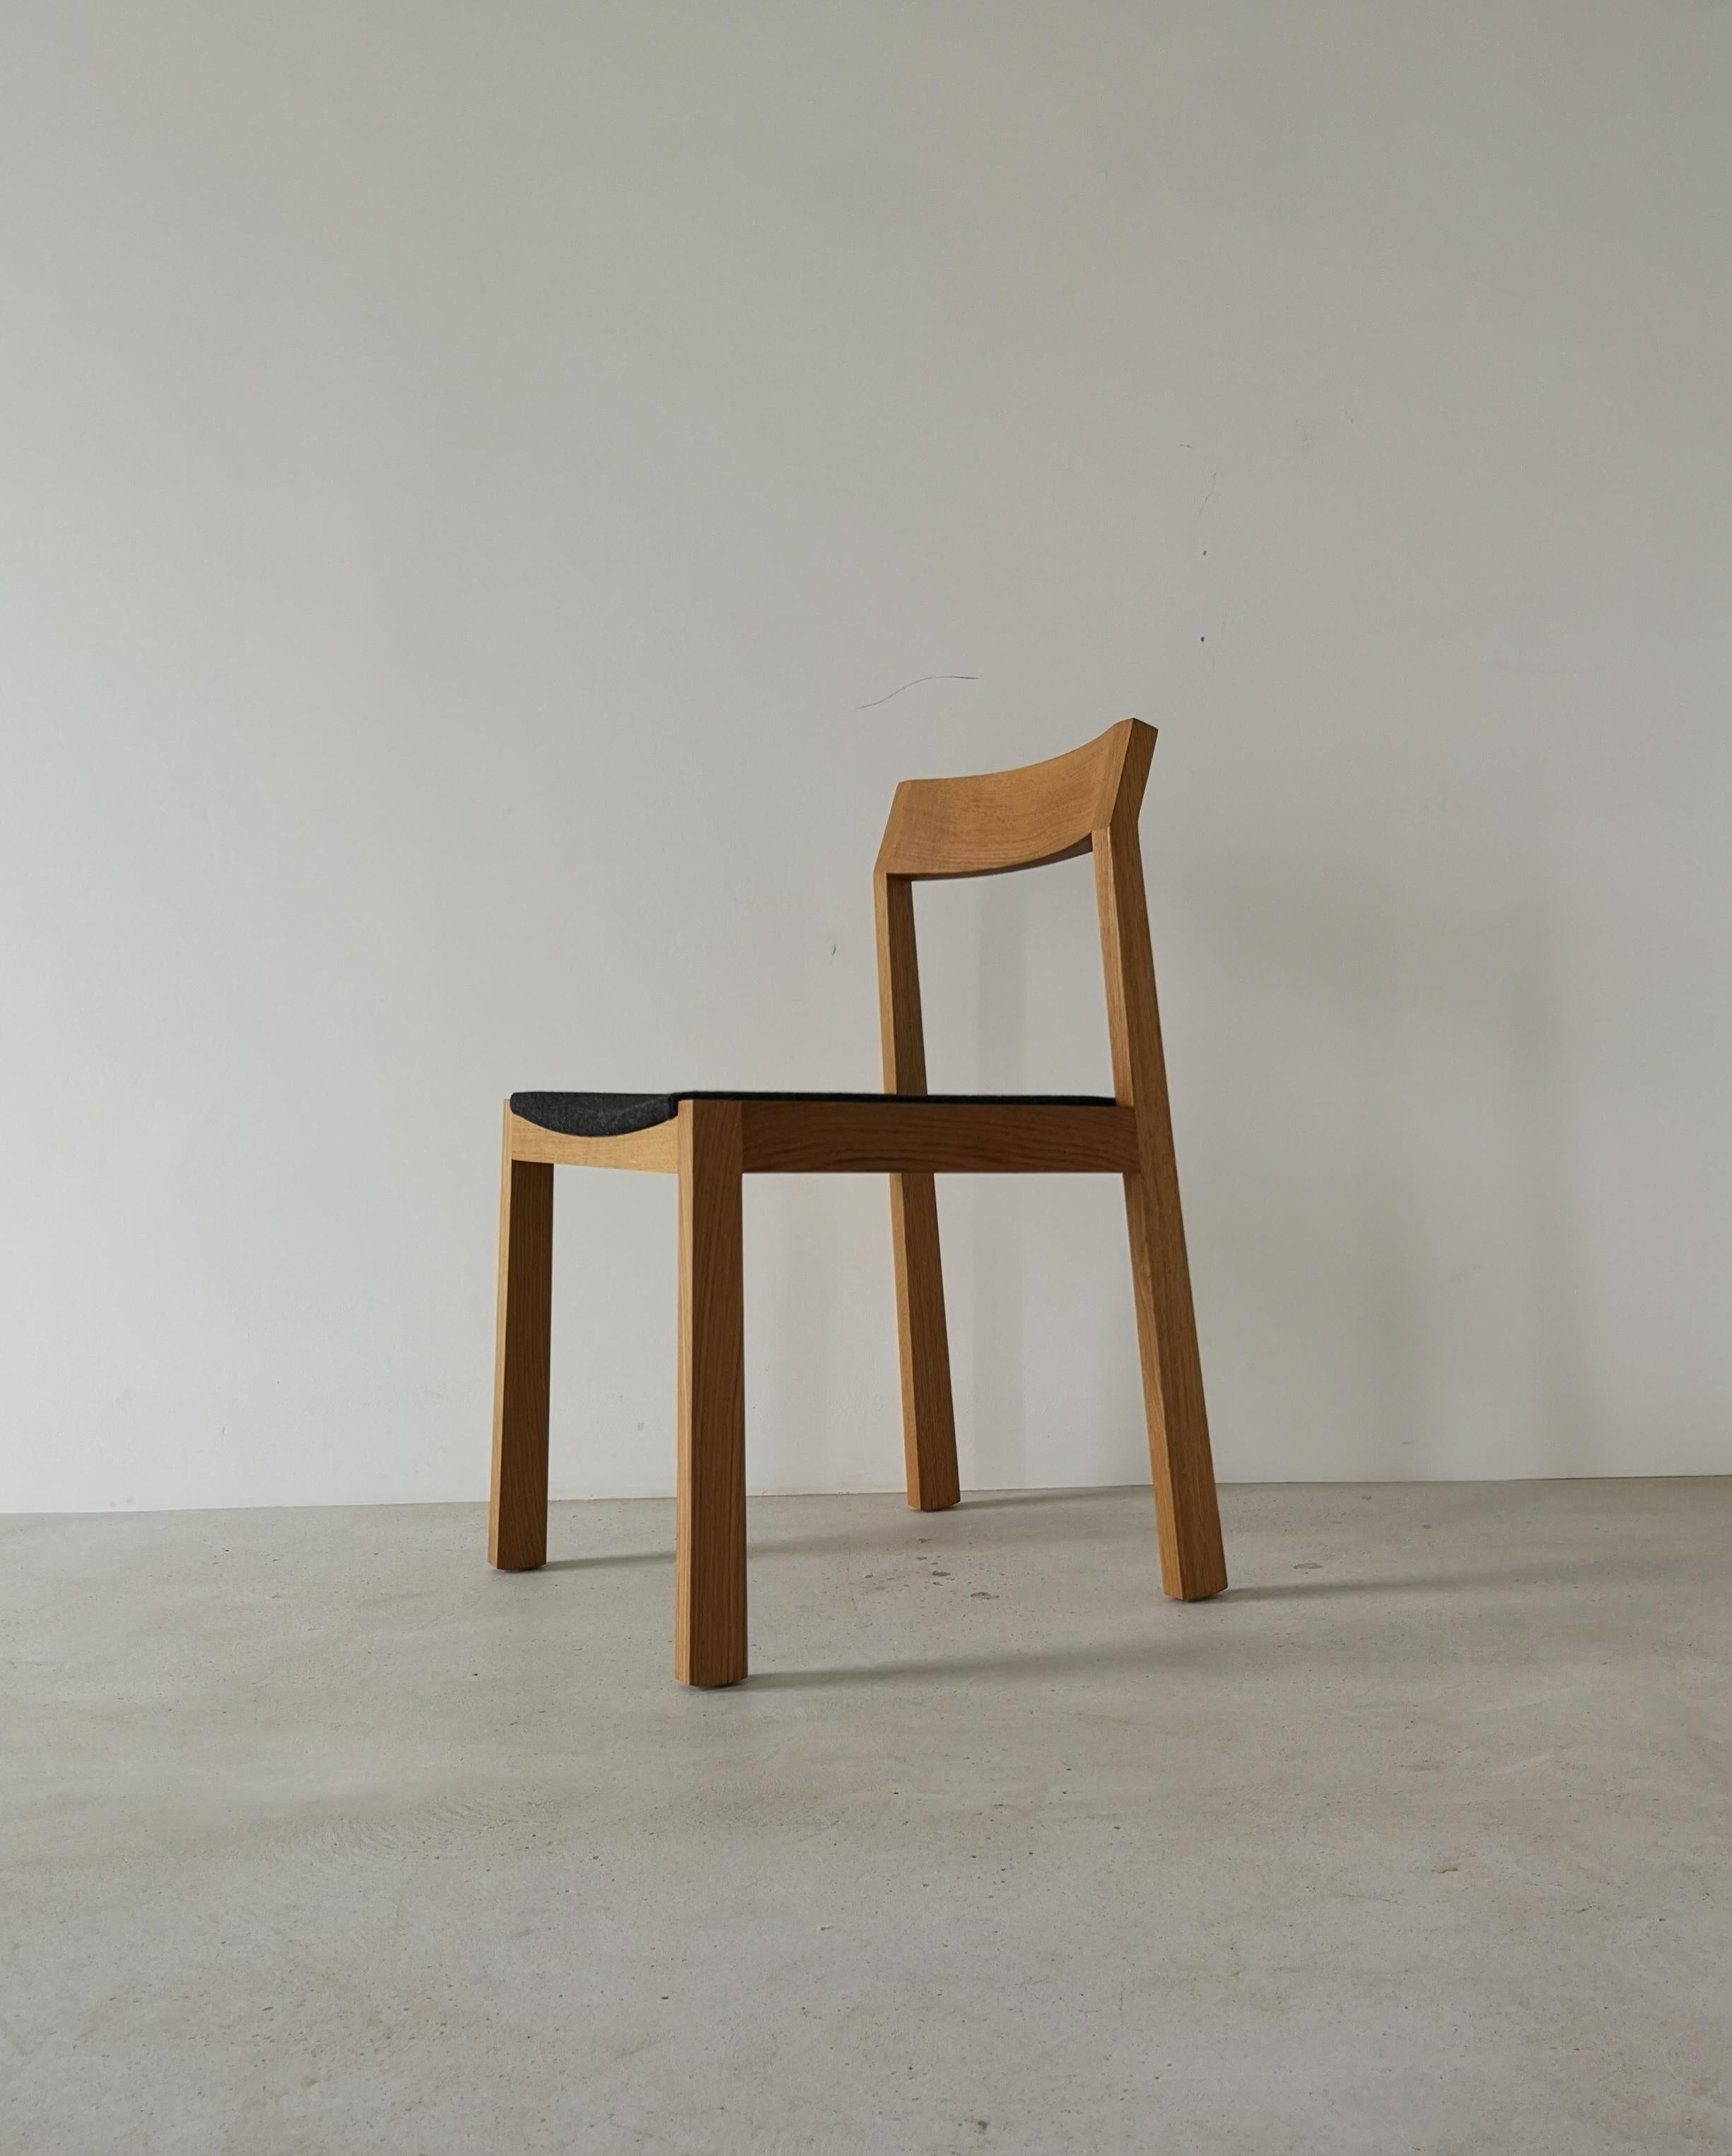 The A+ dining chair is constructed of solid wood and features a curved upholstered and padded seat for your comfort as well as a shaped backrest for support.
A clean, contemporary design with subtle details that goes well with transitional to